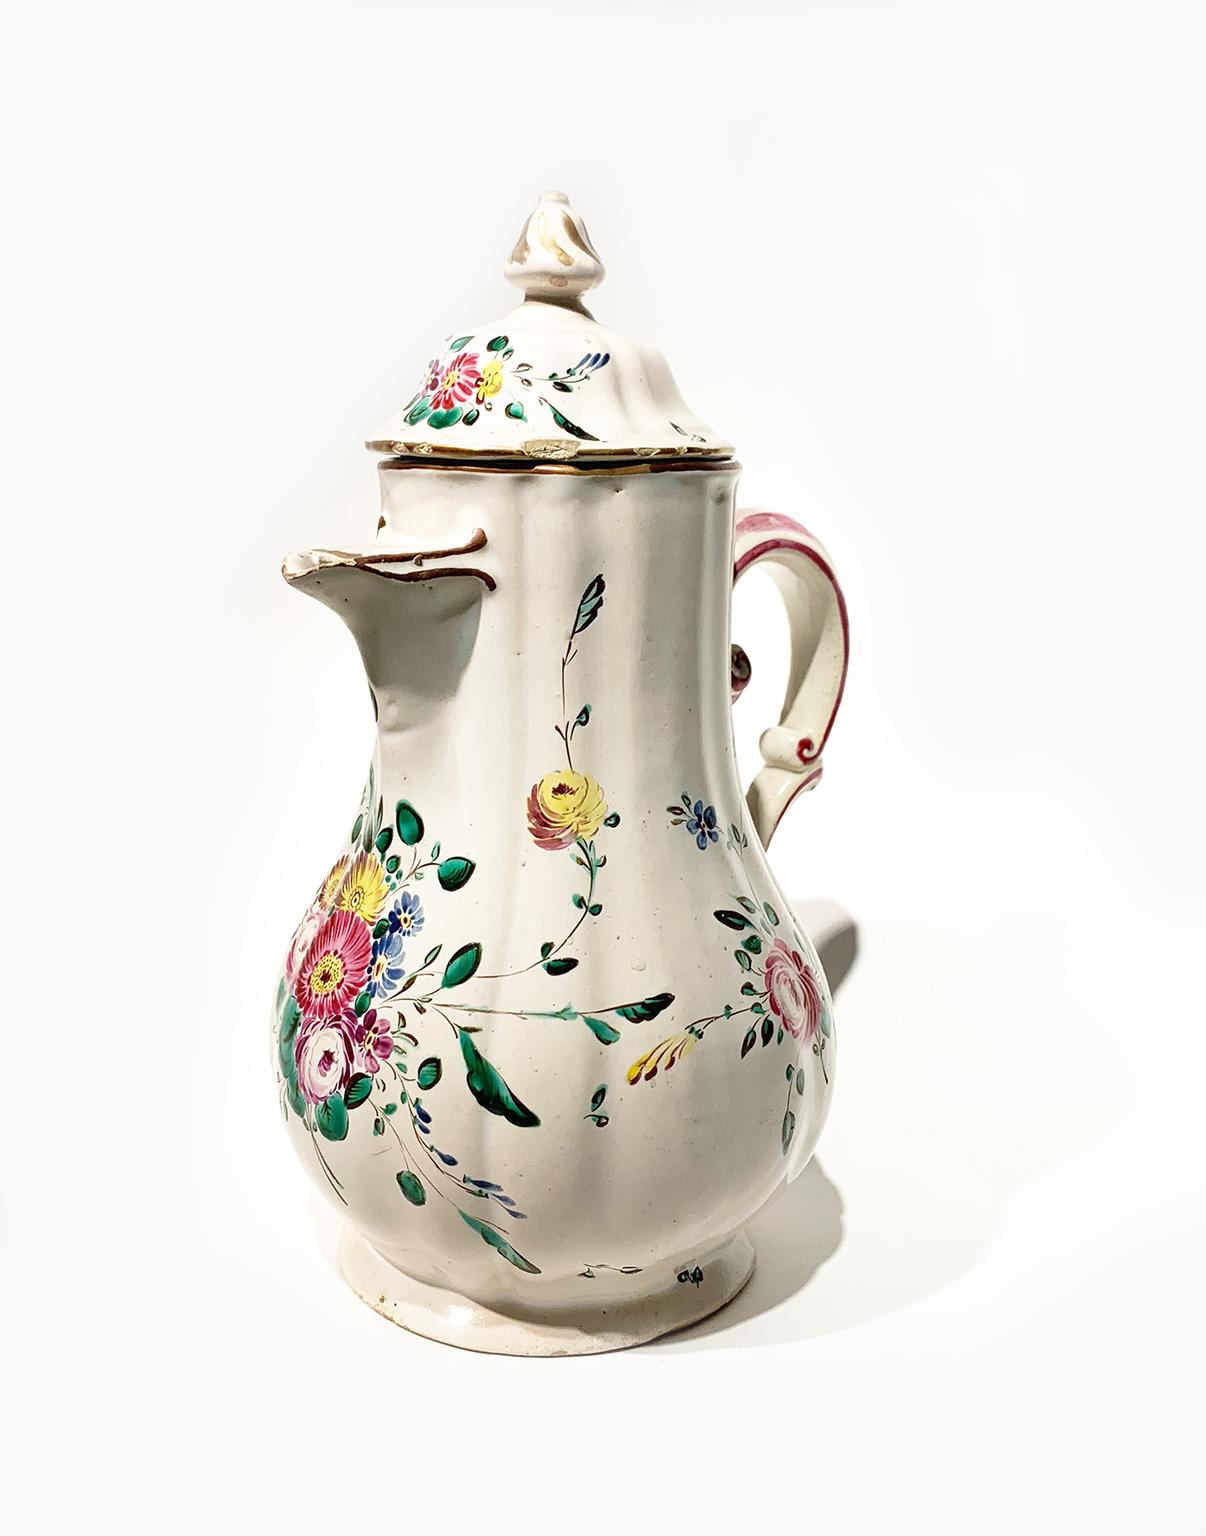 A coffee pot and two cups with saucers
Antonio Ferretti Manufacture 
Lodi, Circa 1765-1770 
Maiolica polychrome decorated “a piccolo fuoco” (third fire).
They measure:
coffee pot: 9.64 in height x 6.69 x 5.51 (24.5 cm x 17 x 14); ); 1.16 lb  (528